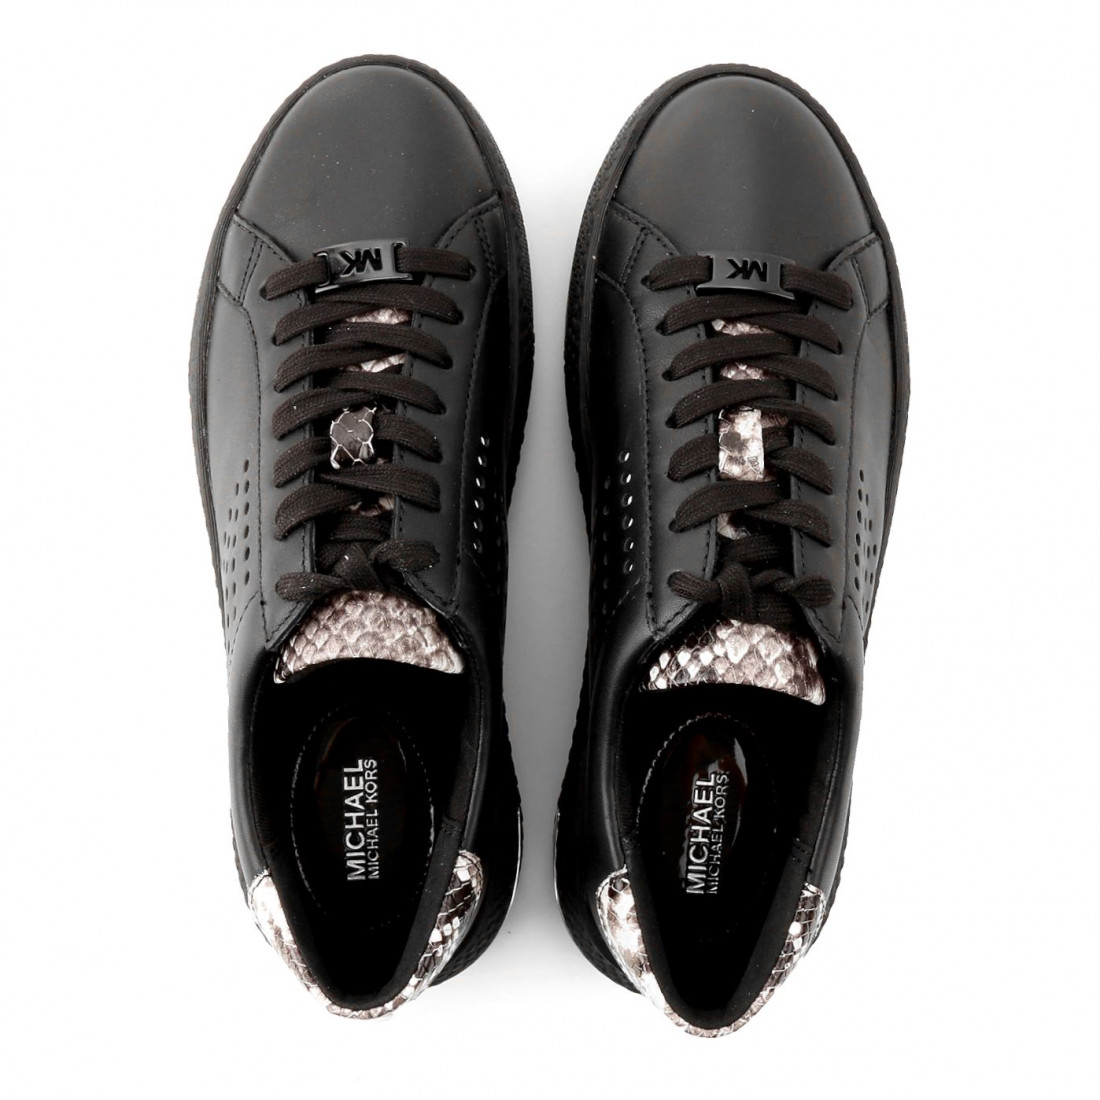 michael kors patent leather sneakers